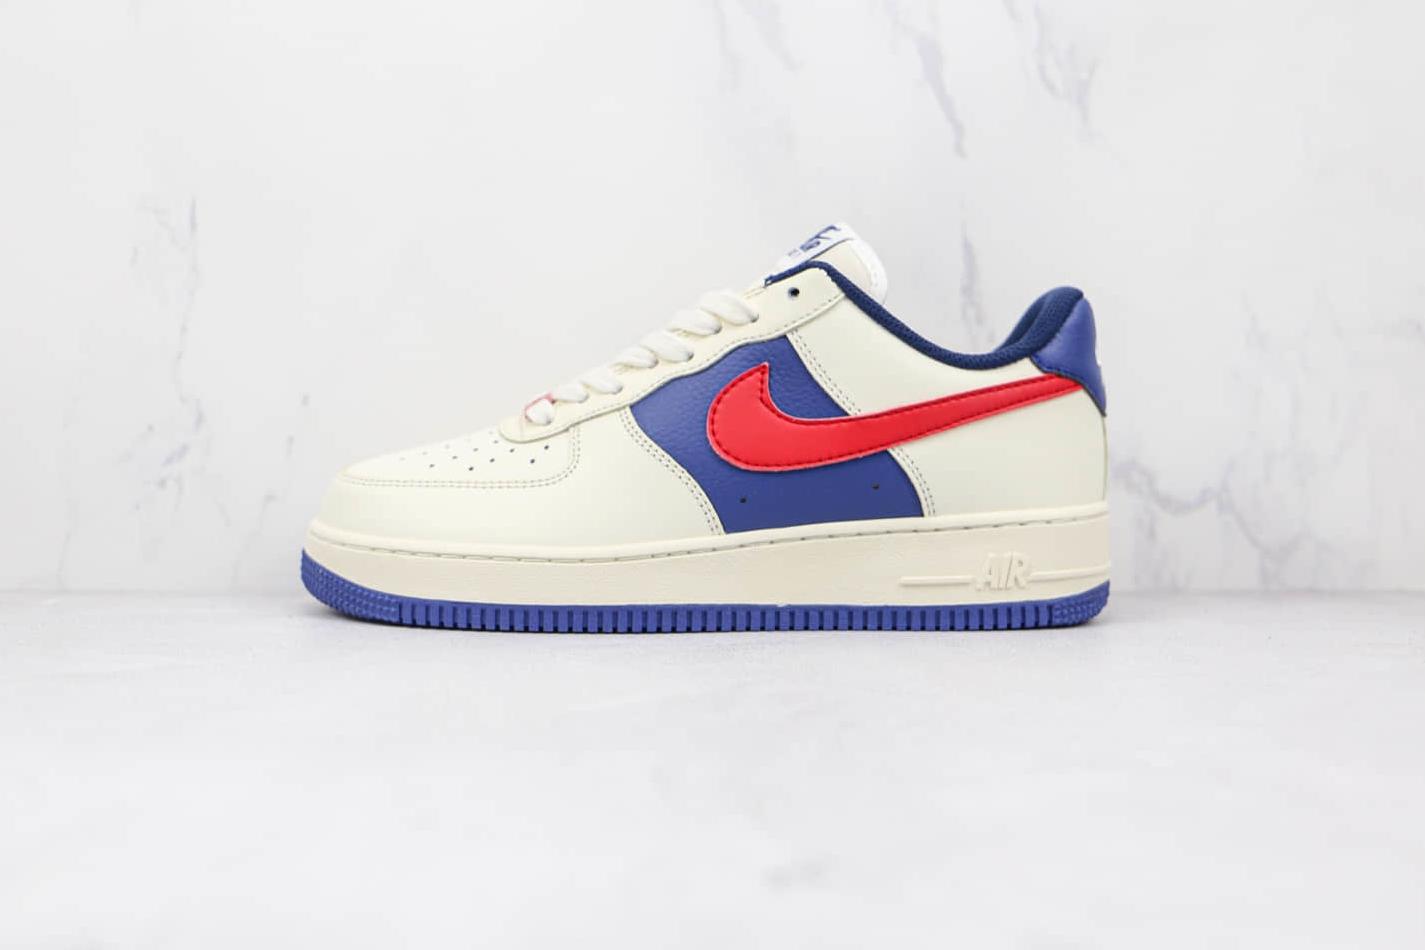 Nike Air Force 1 07 Low White Blue Red Shoes CW2288-901 - Stylish and Classic Sneakers for Men